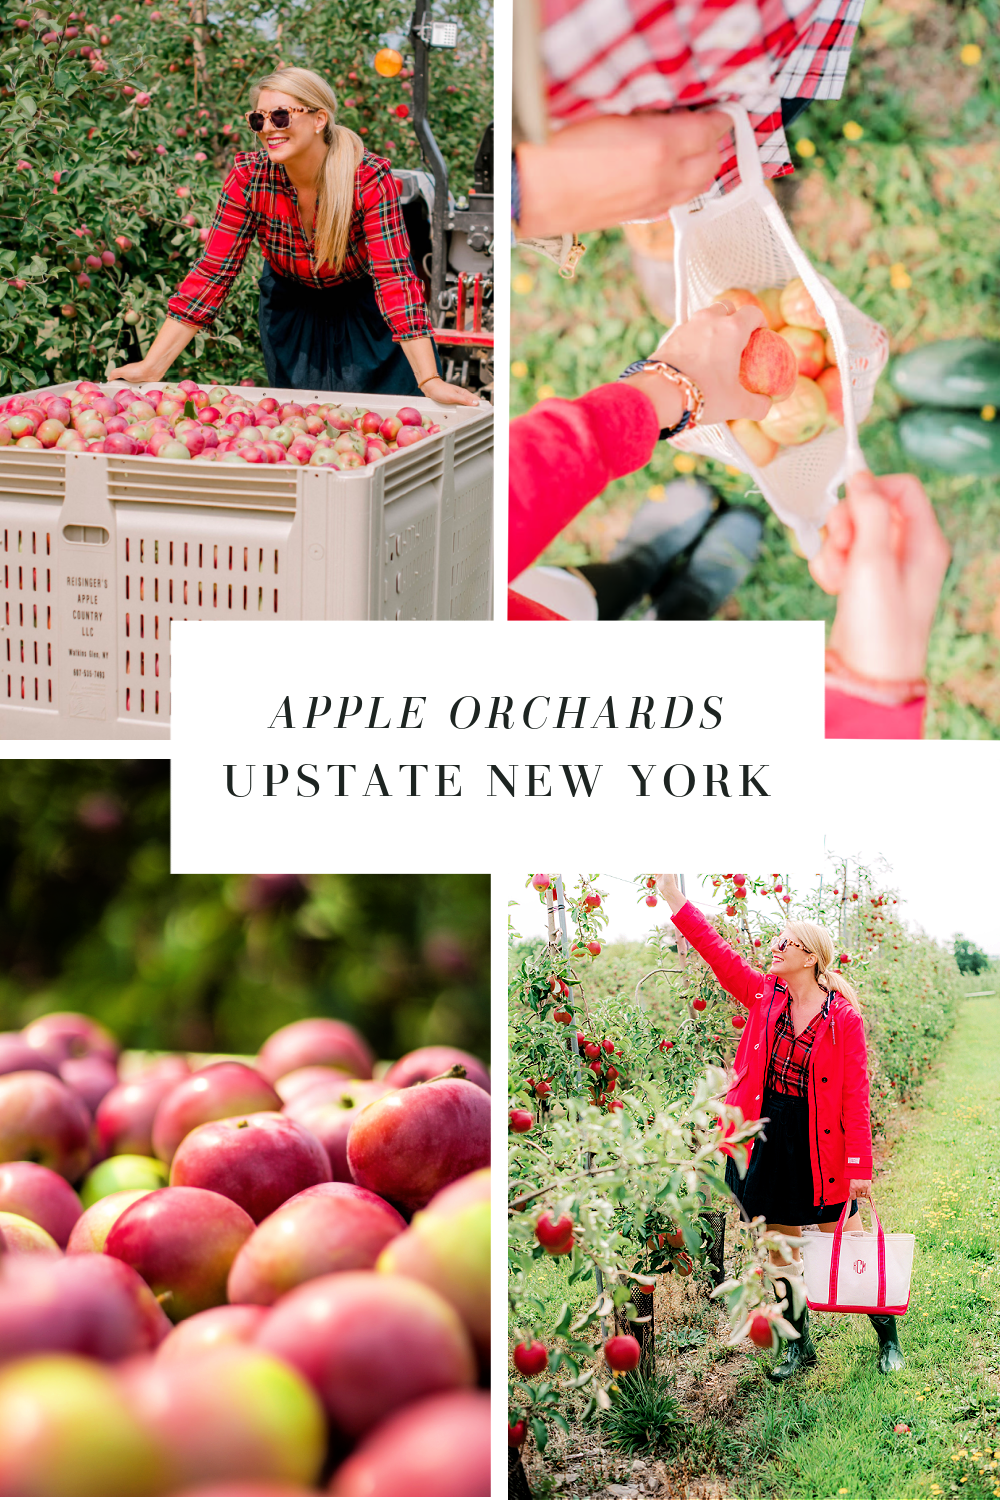 APPLE-ORCHARDS-NEW-YORK-UPSTATE-FINGER-LAKES.png